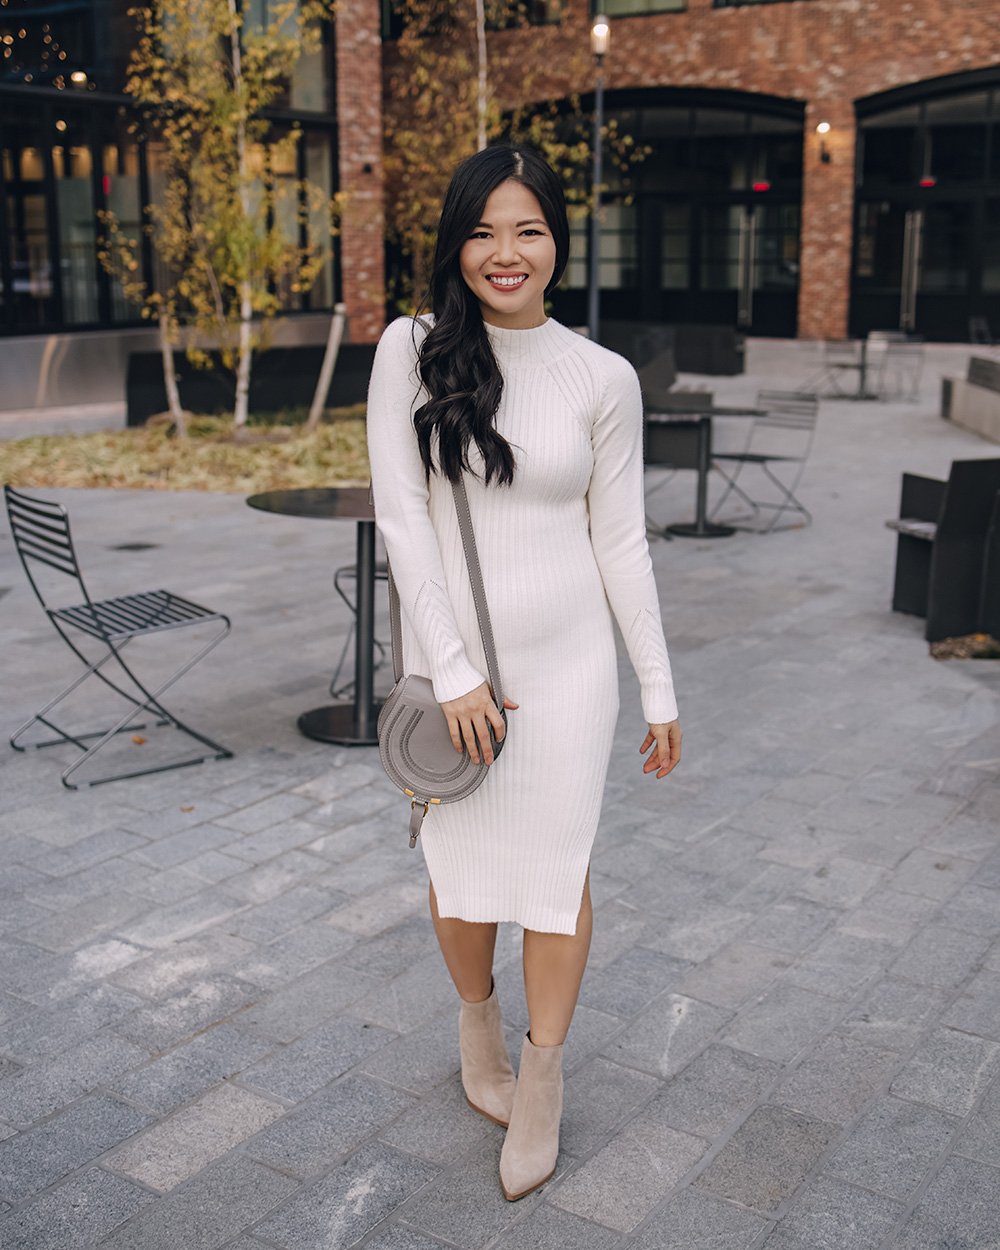 Bumpin' in this Winter White Sweater Dress – Skirt The Rules